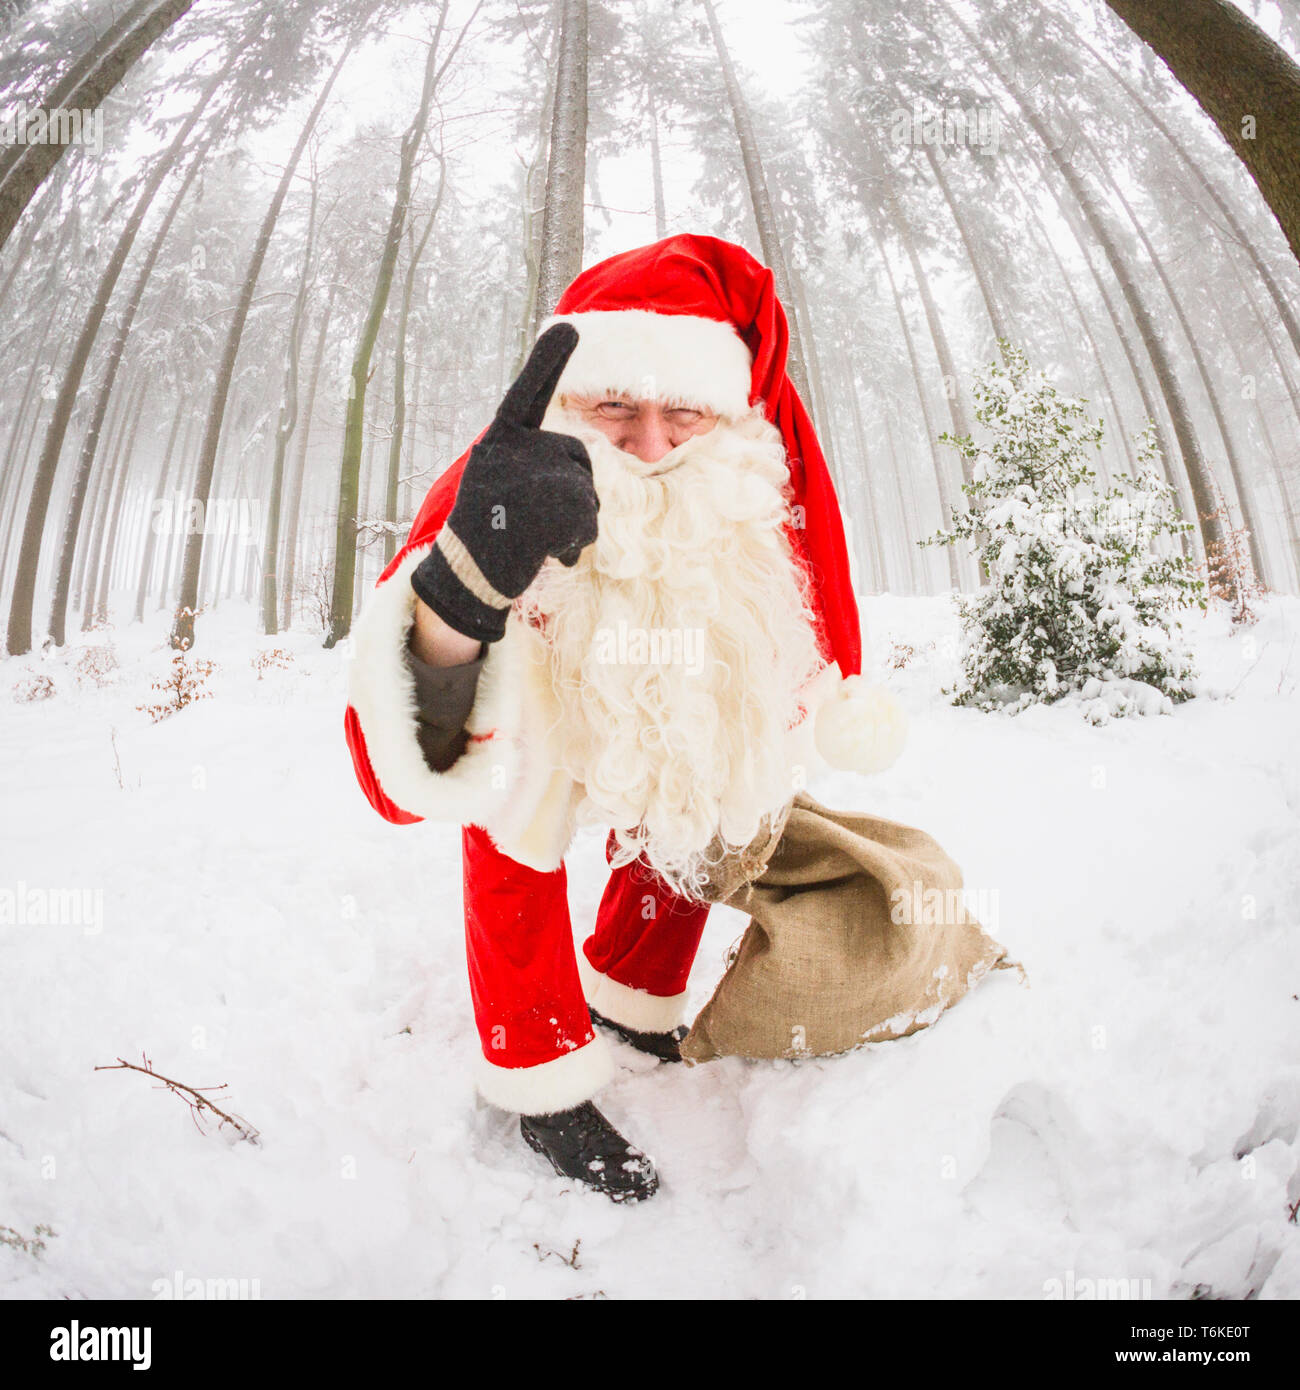 Santa Claus pointing with his index fingers up Stock Photo